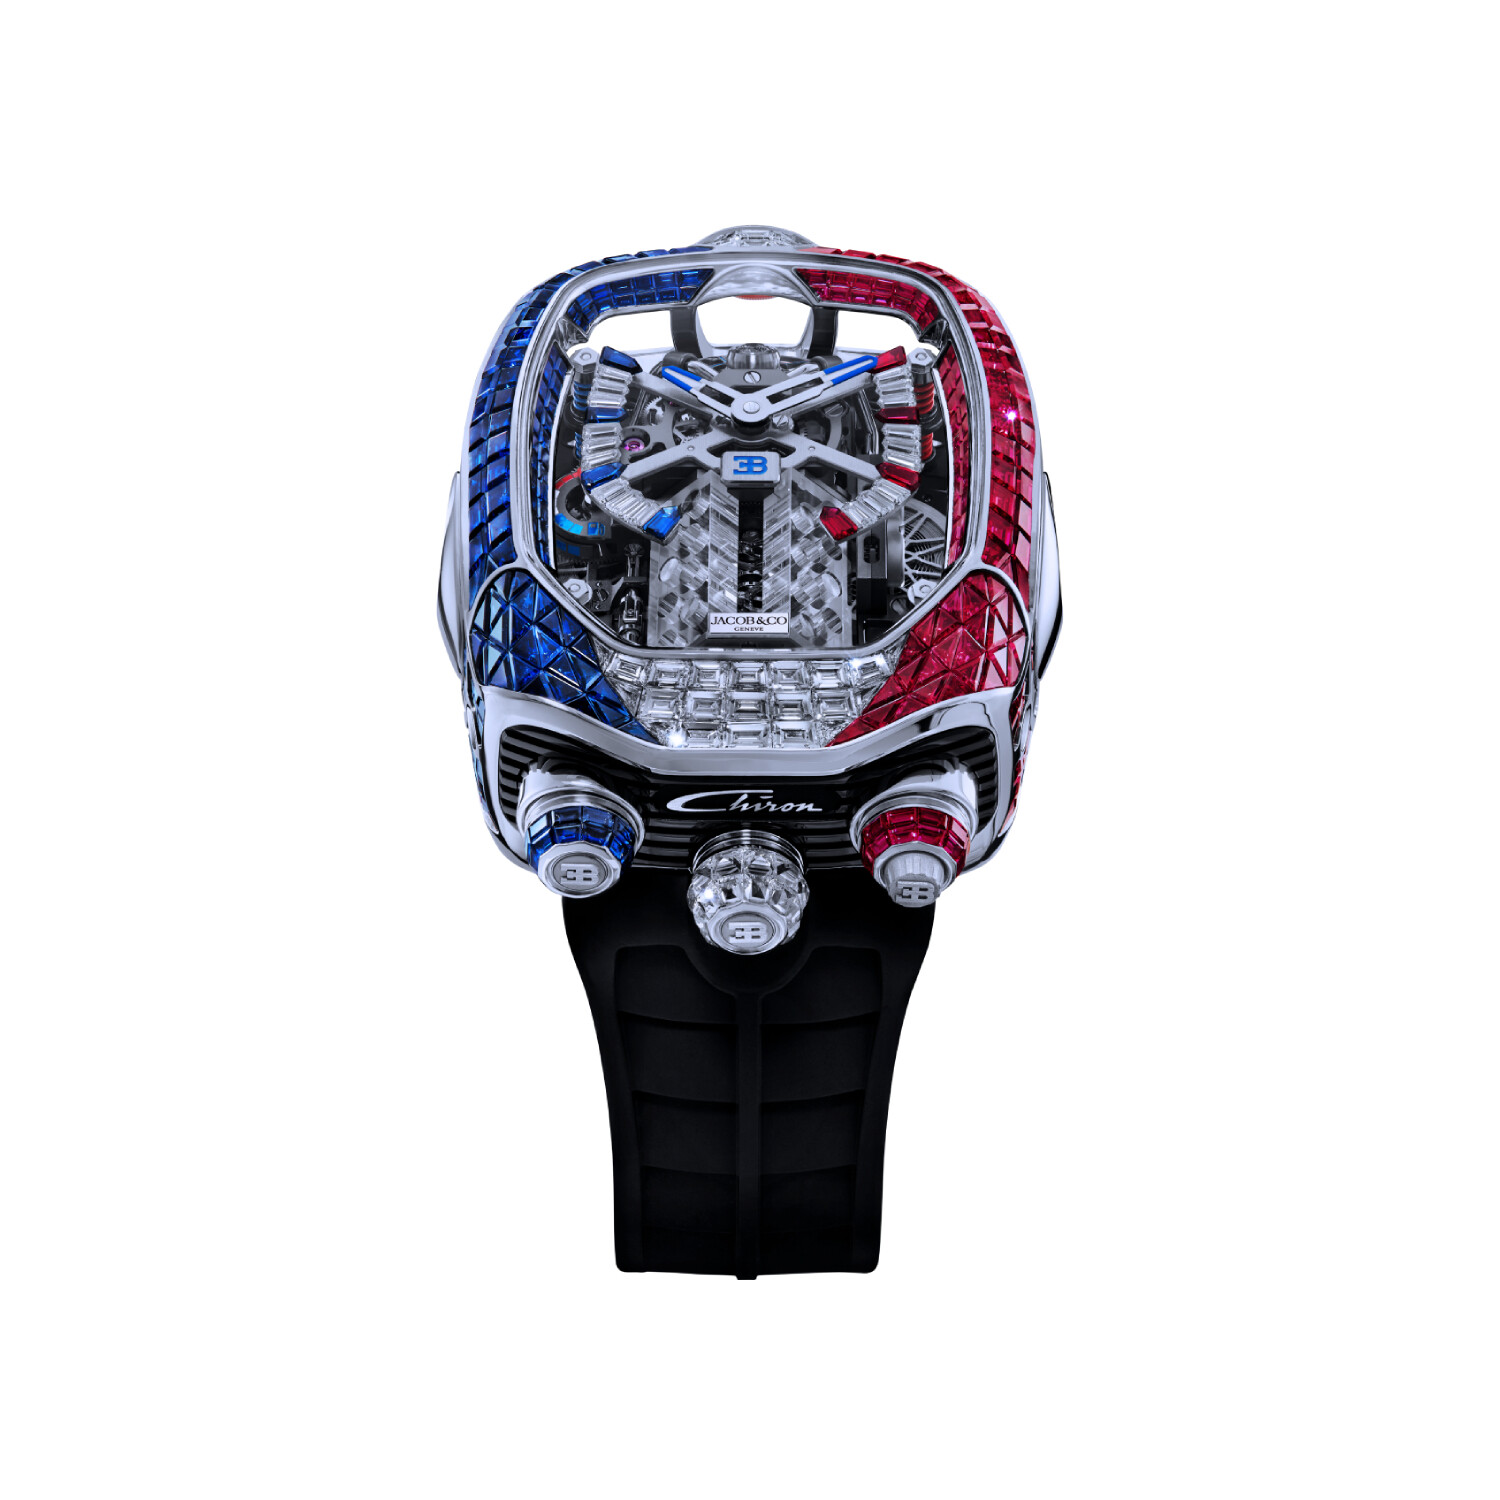 Manny Khoshbin and Jacob & Co Collaborate for a Bugatti Watch Based on His  Hermes Edition - autoevolution